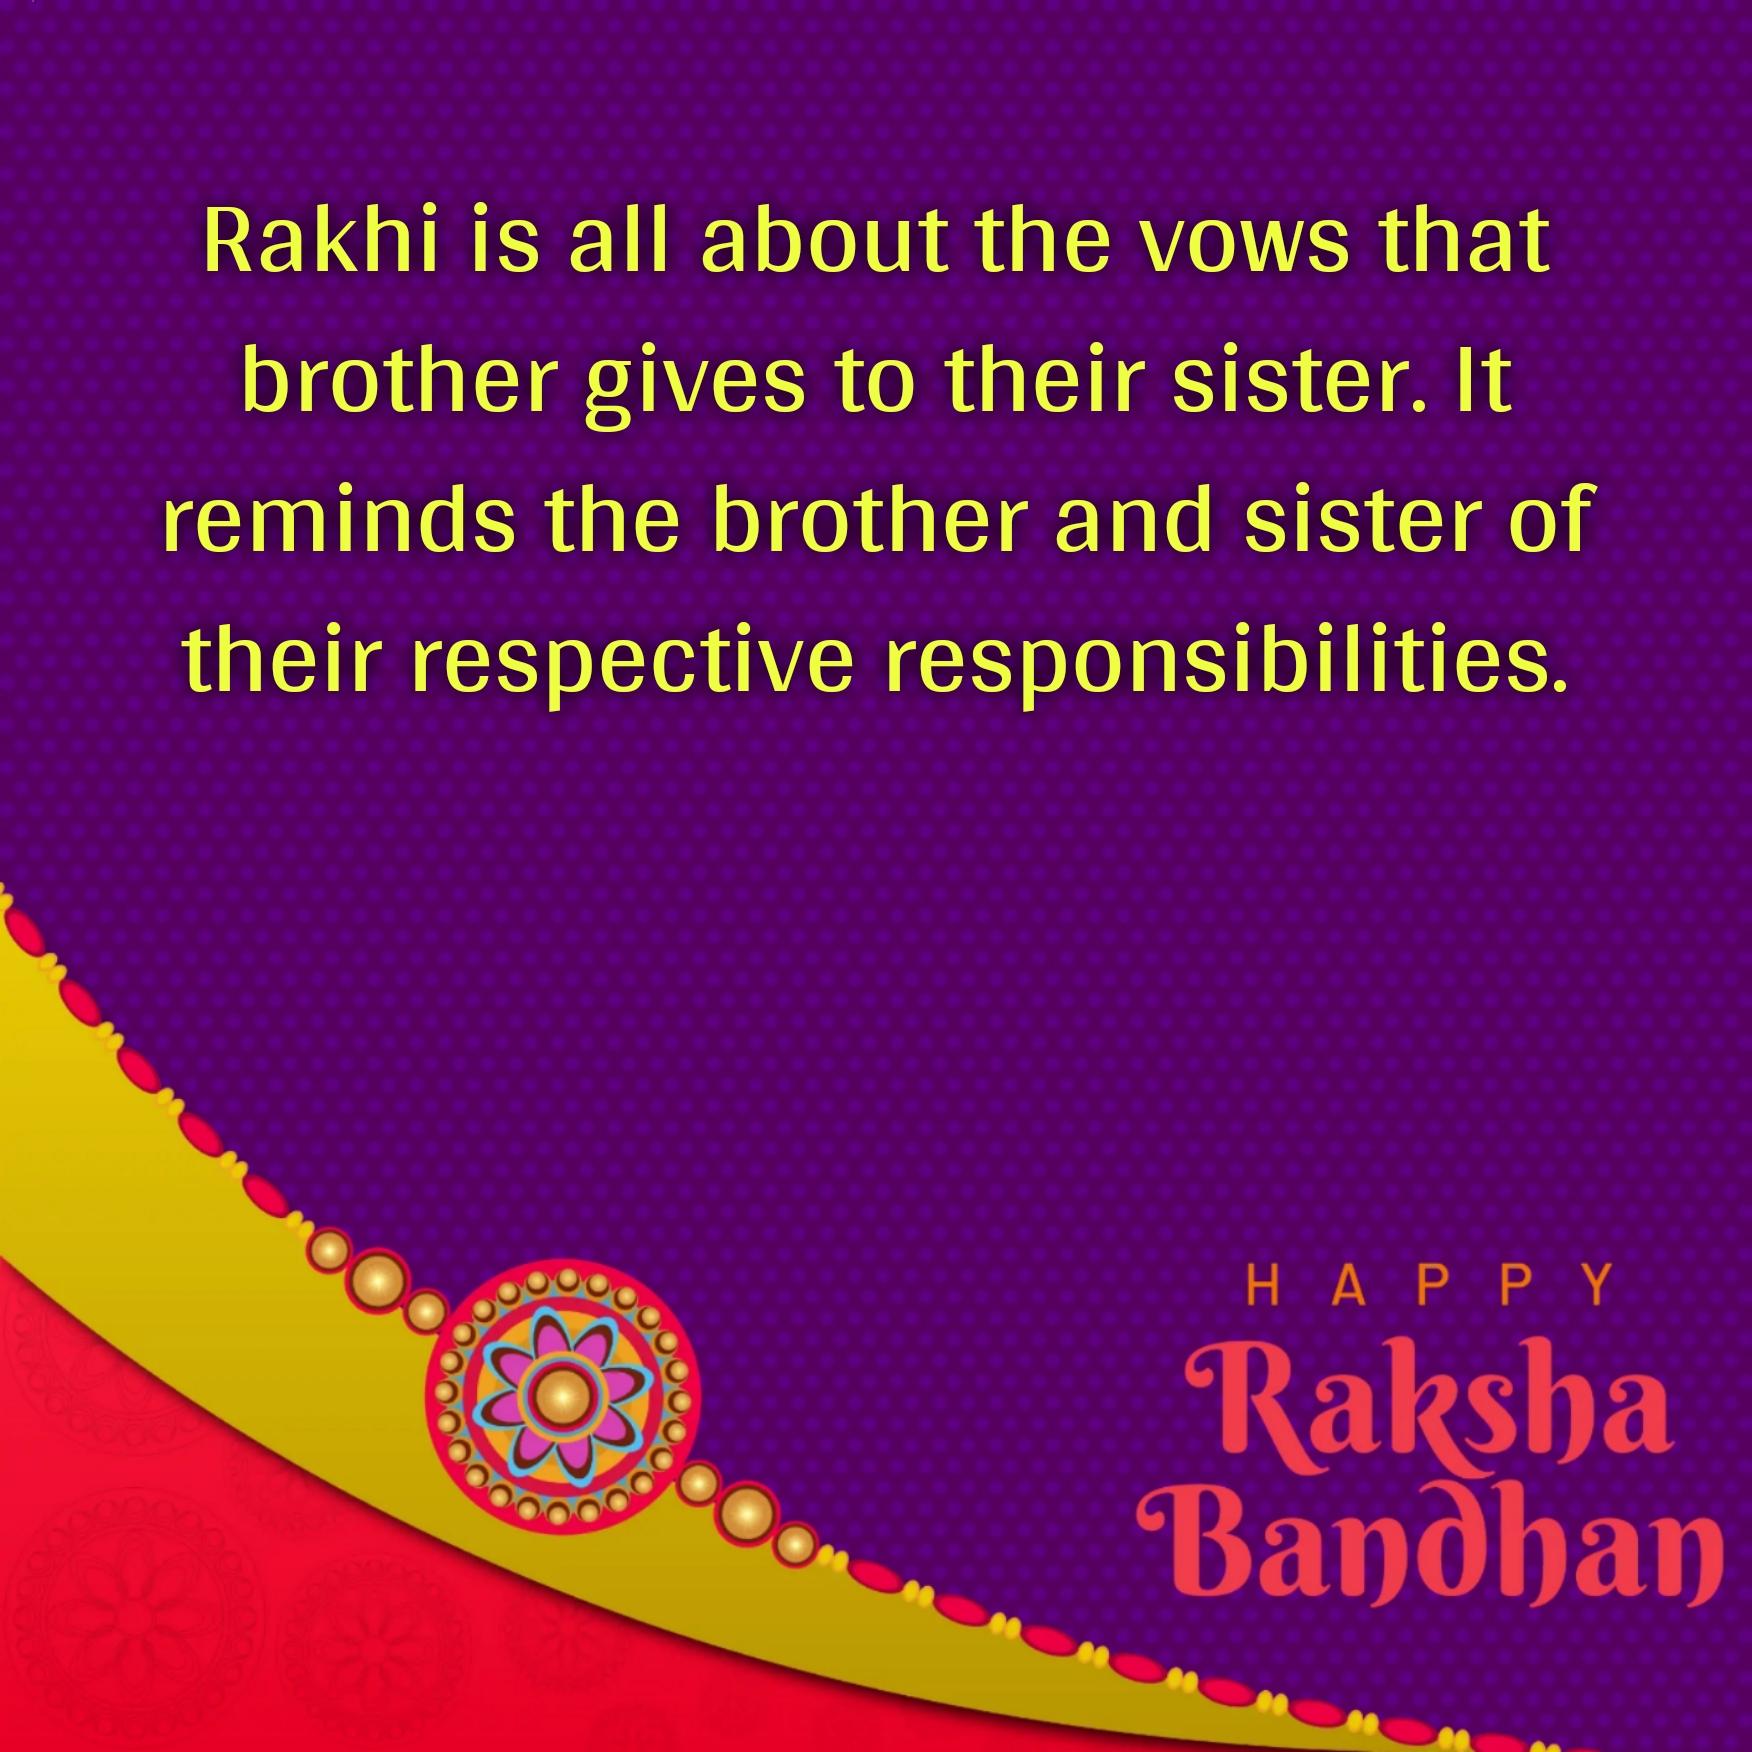 Rakhi is all about the vows that brother gives to their sister